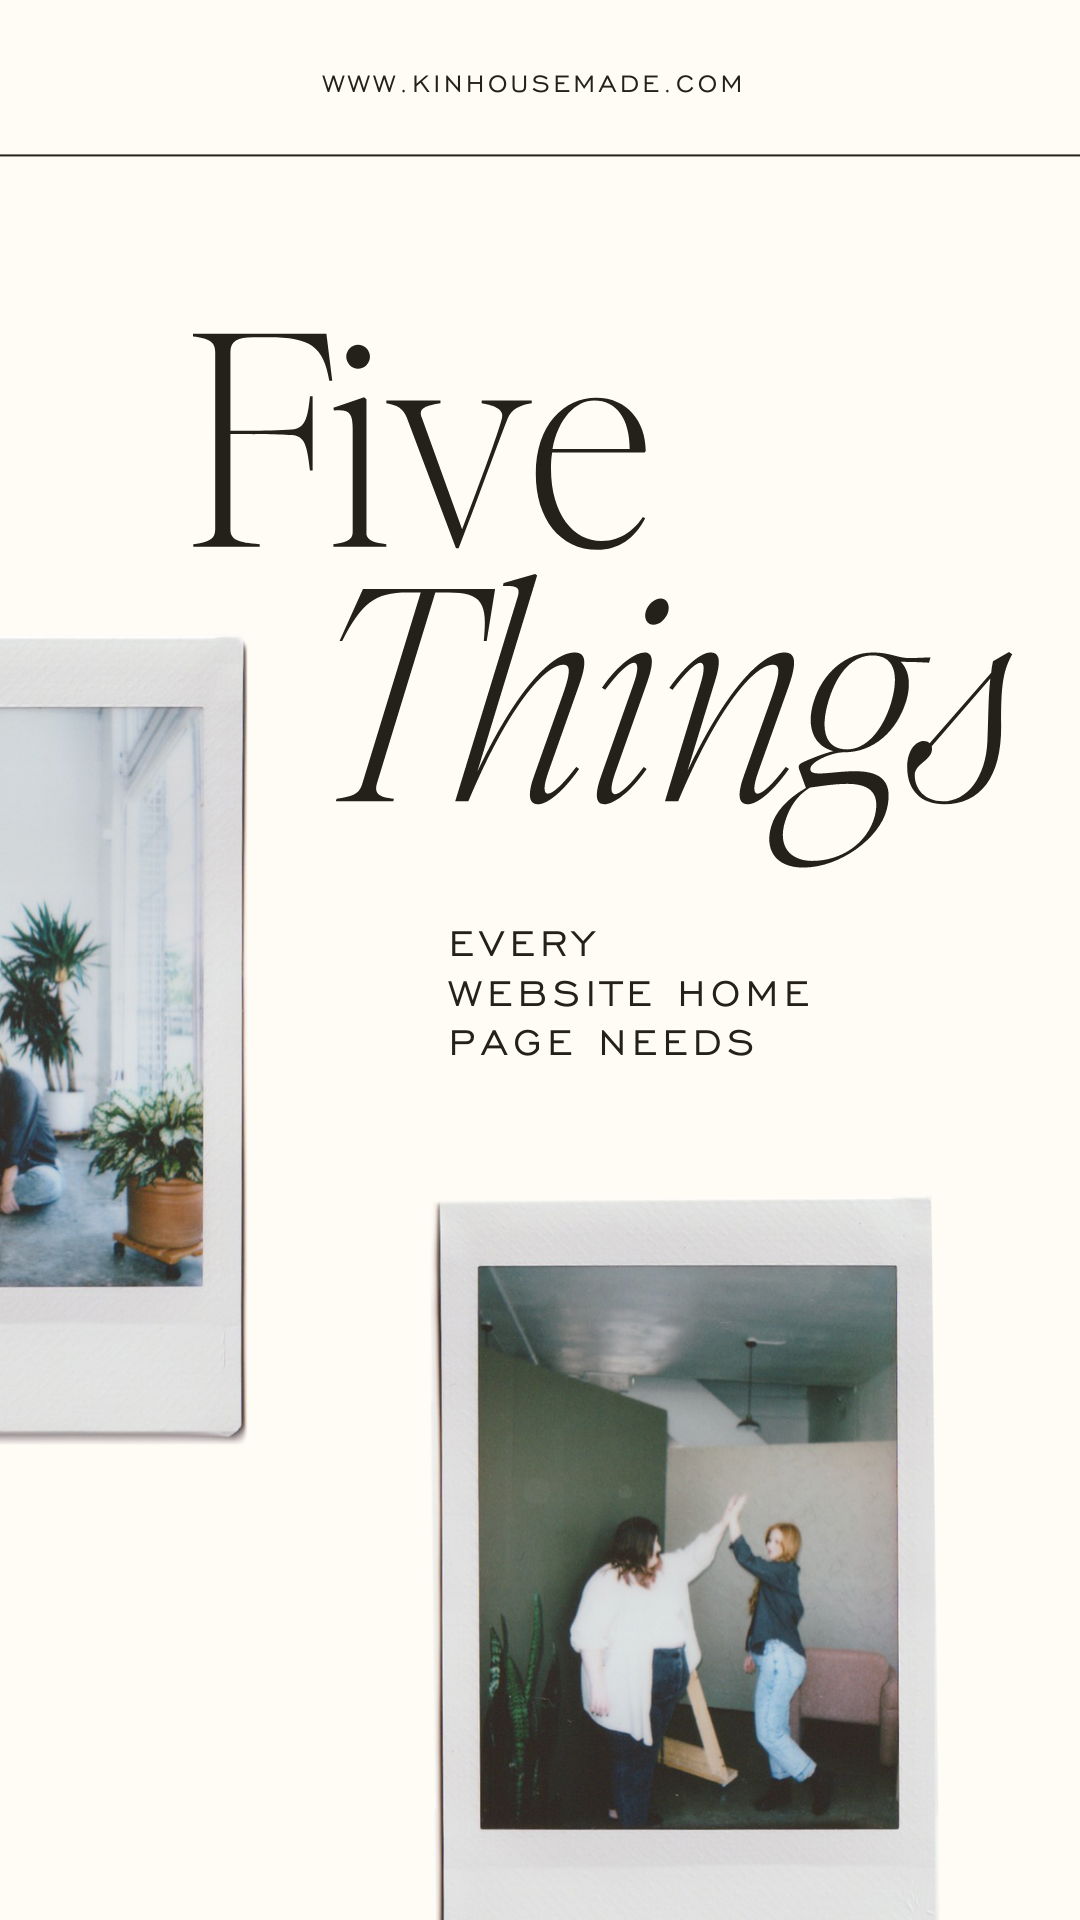 5 Things Your Website Home Page Needs | Kinhouse Made